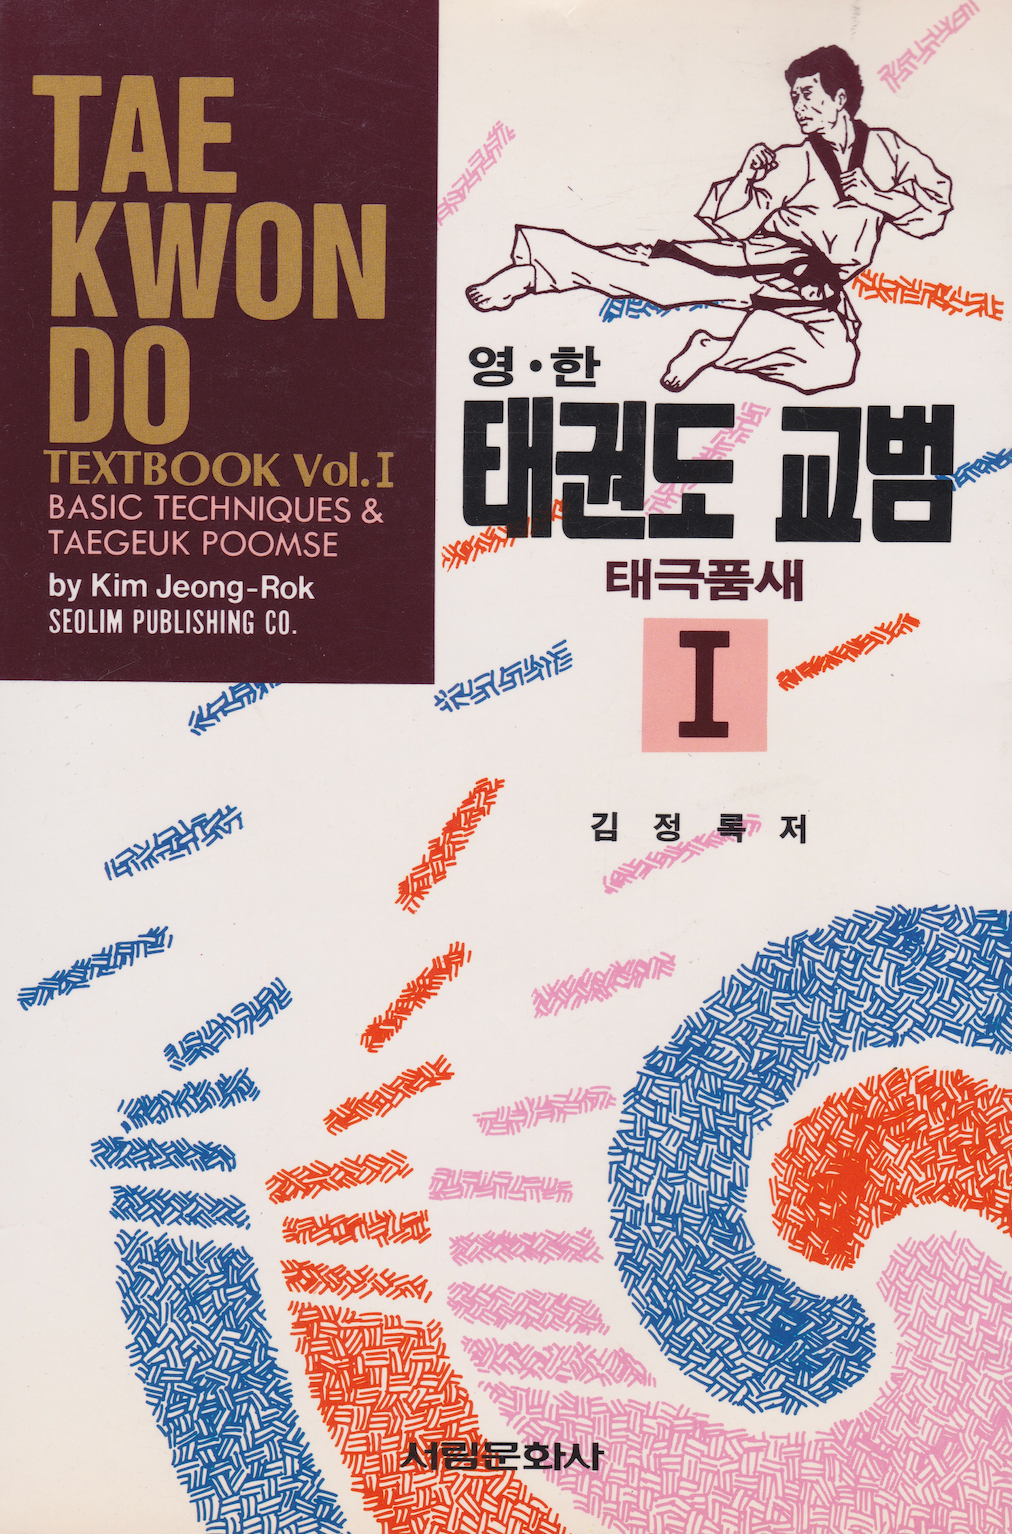 Tae Kwon Do Textbook Vol 1 by Kim Jeong-Rok (Preowned)